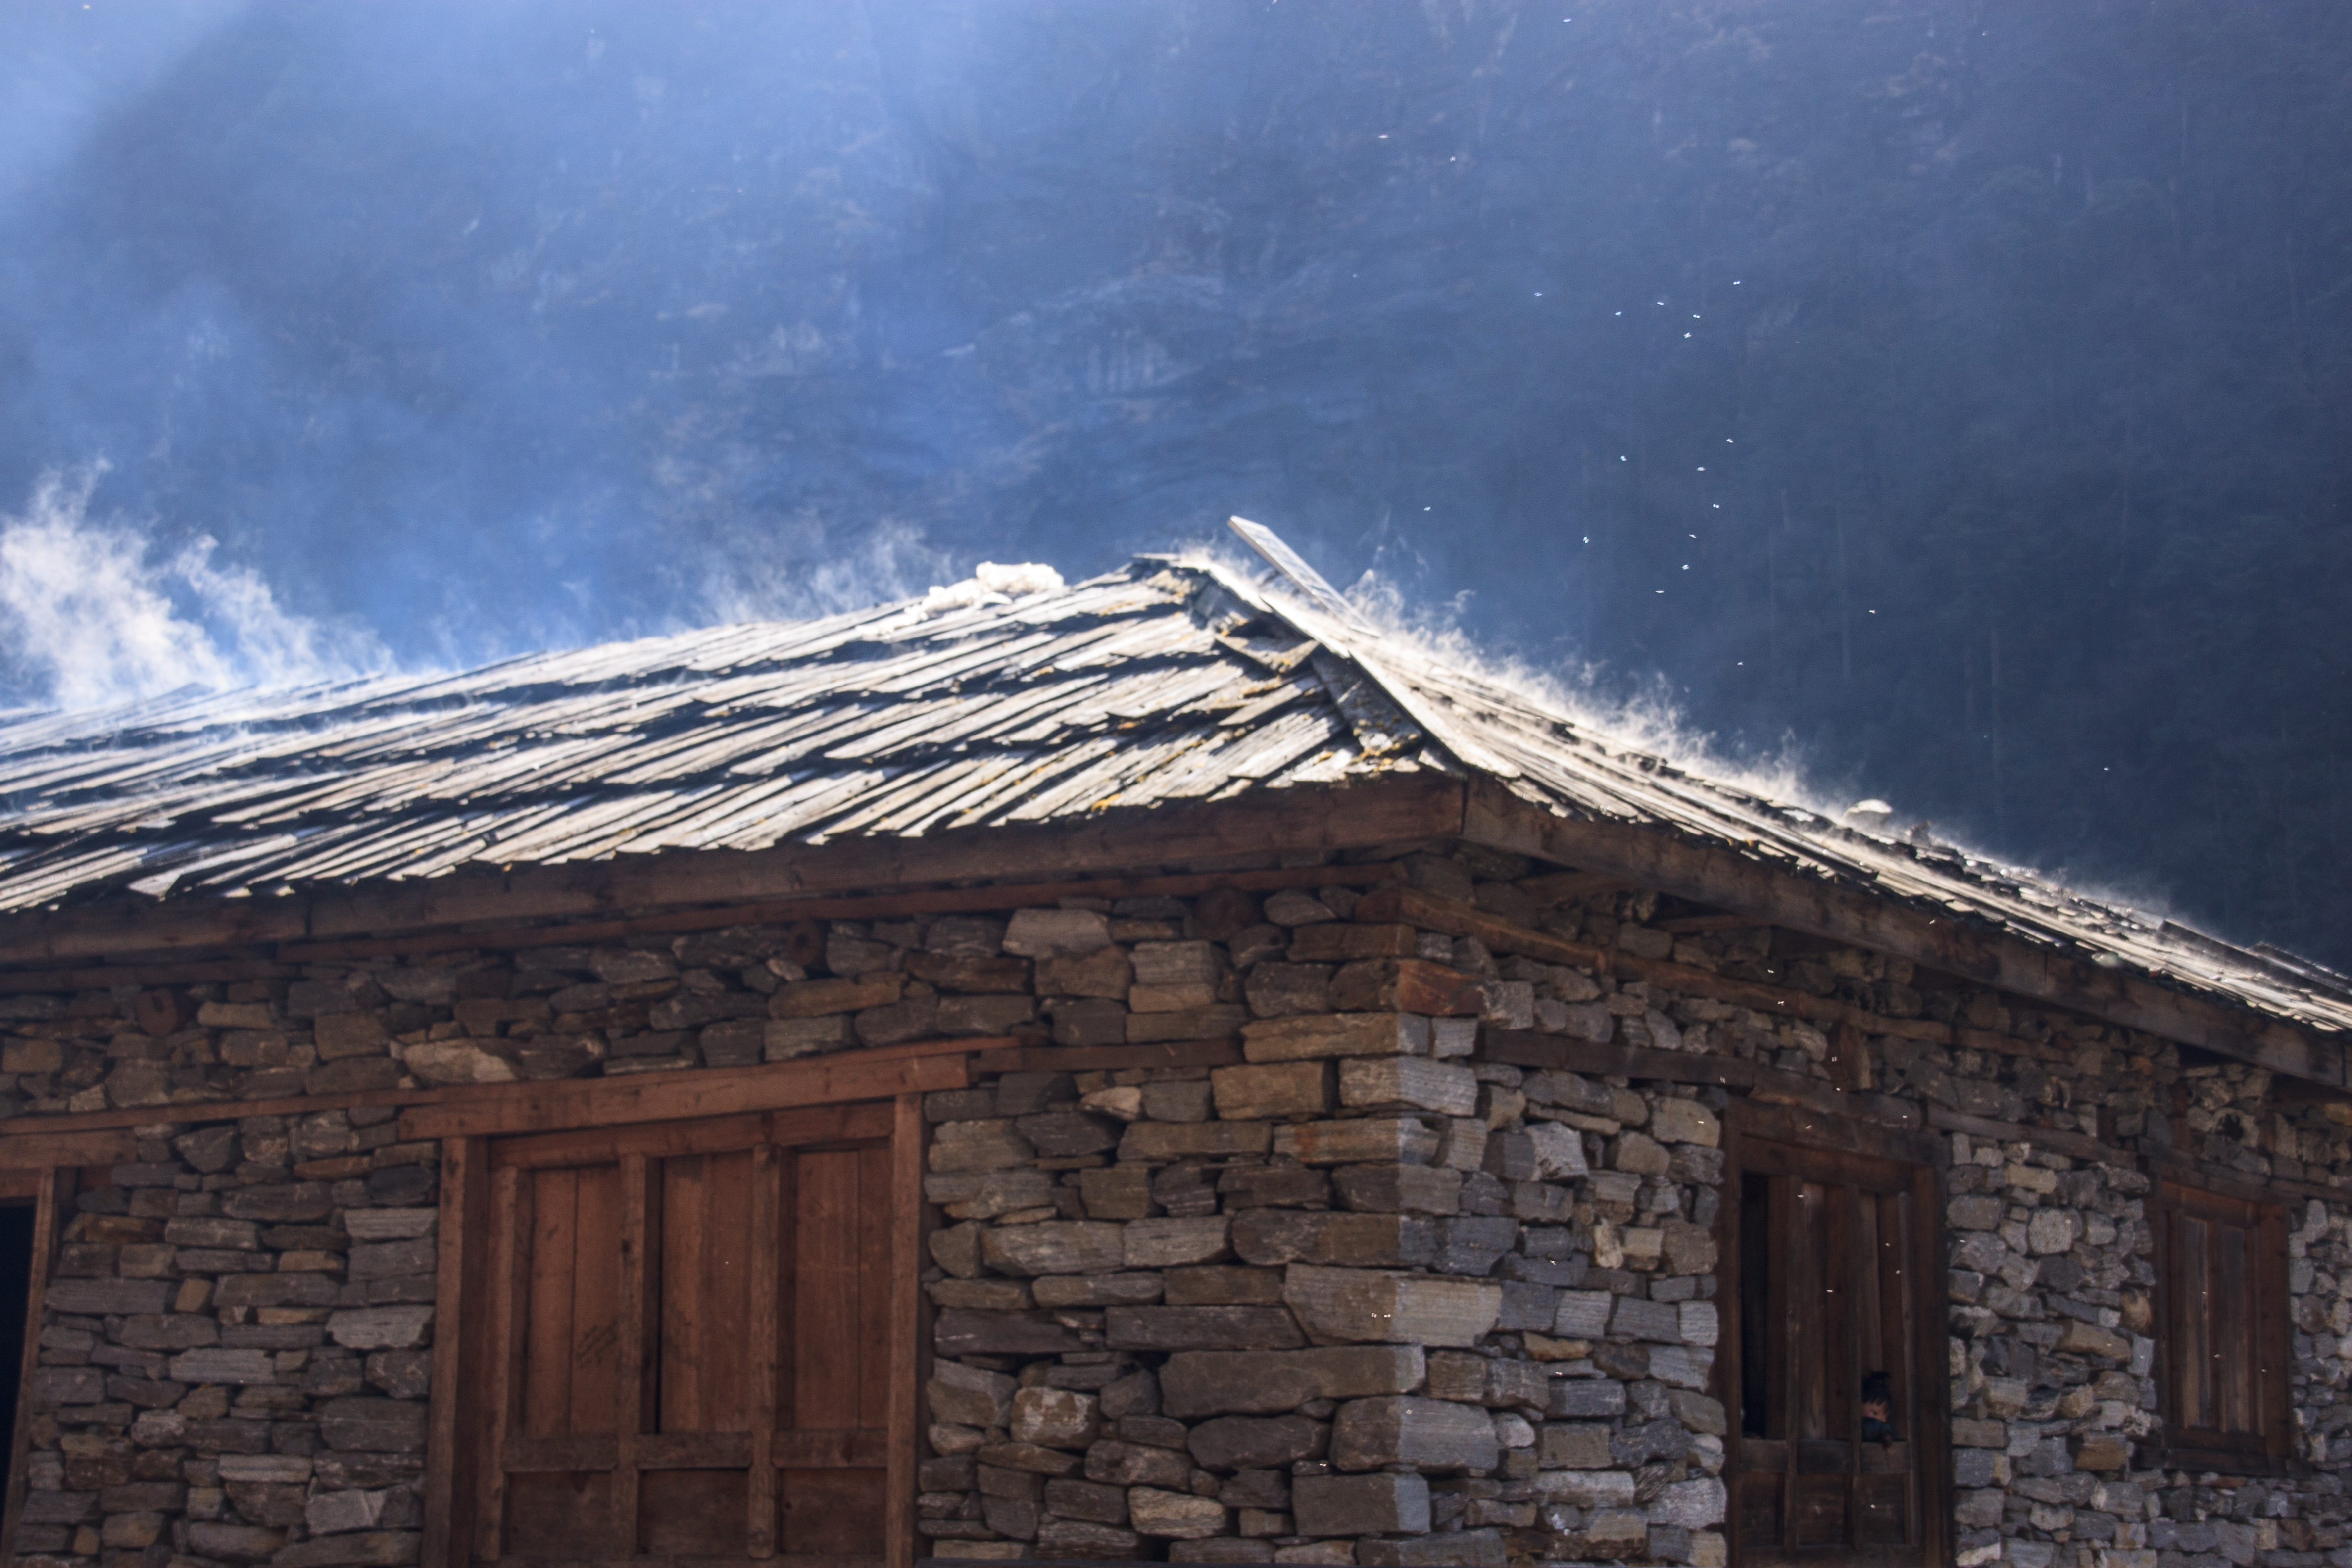 Smoke rising through the roof of a house in Khote.